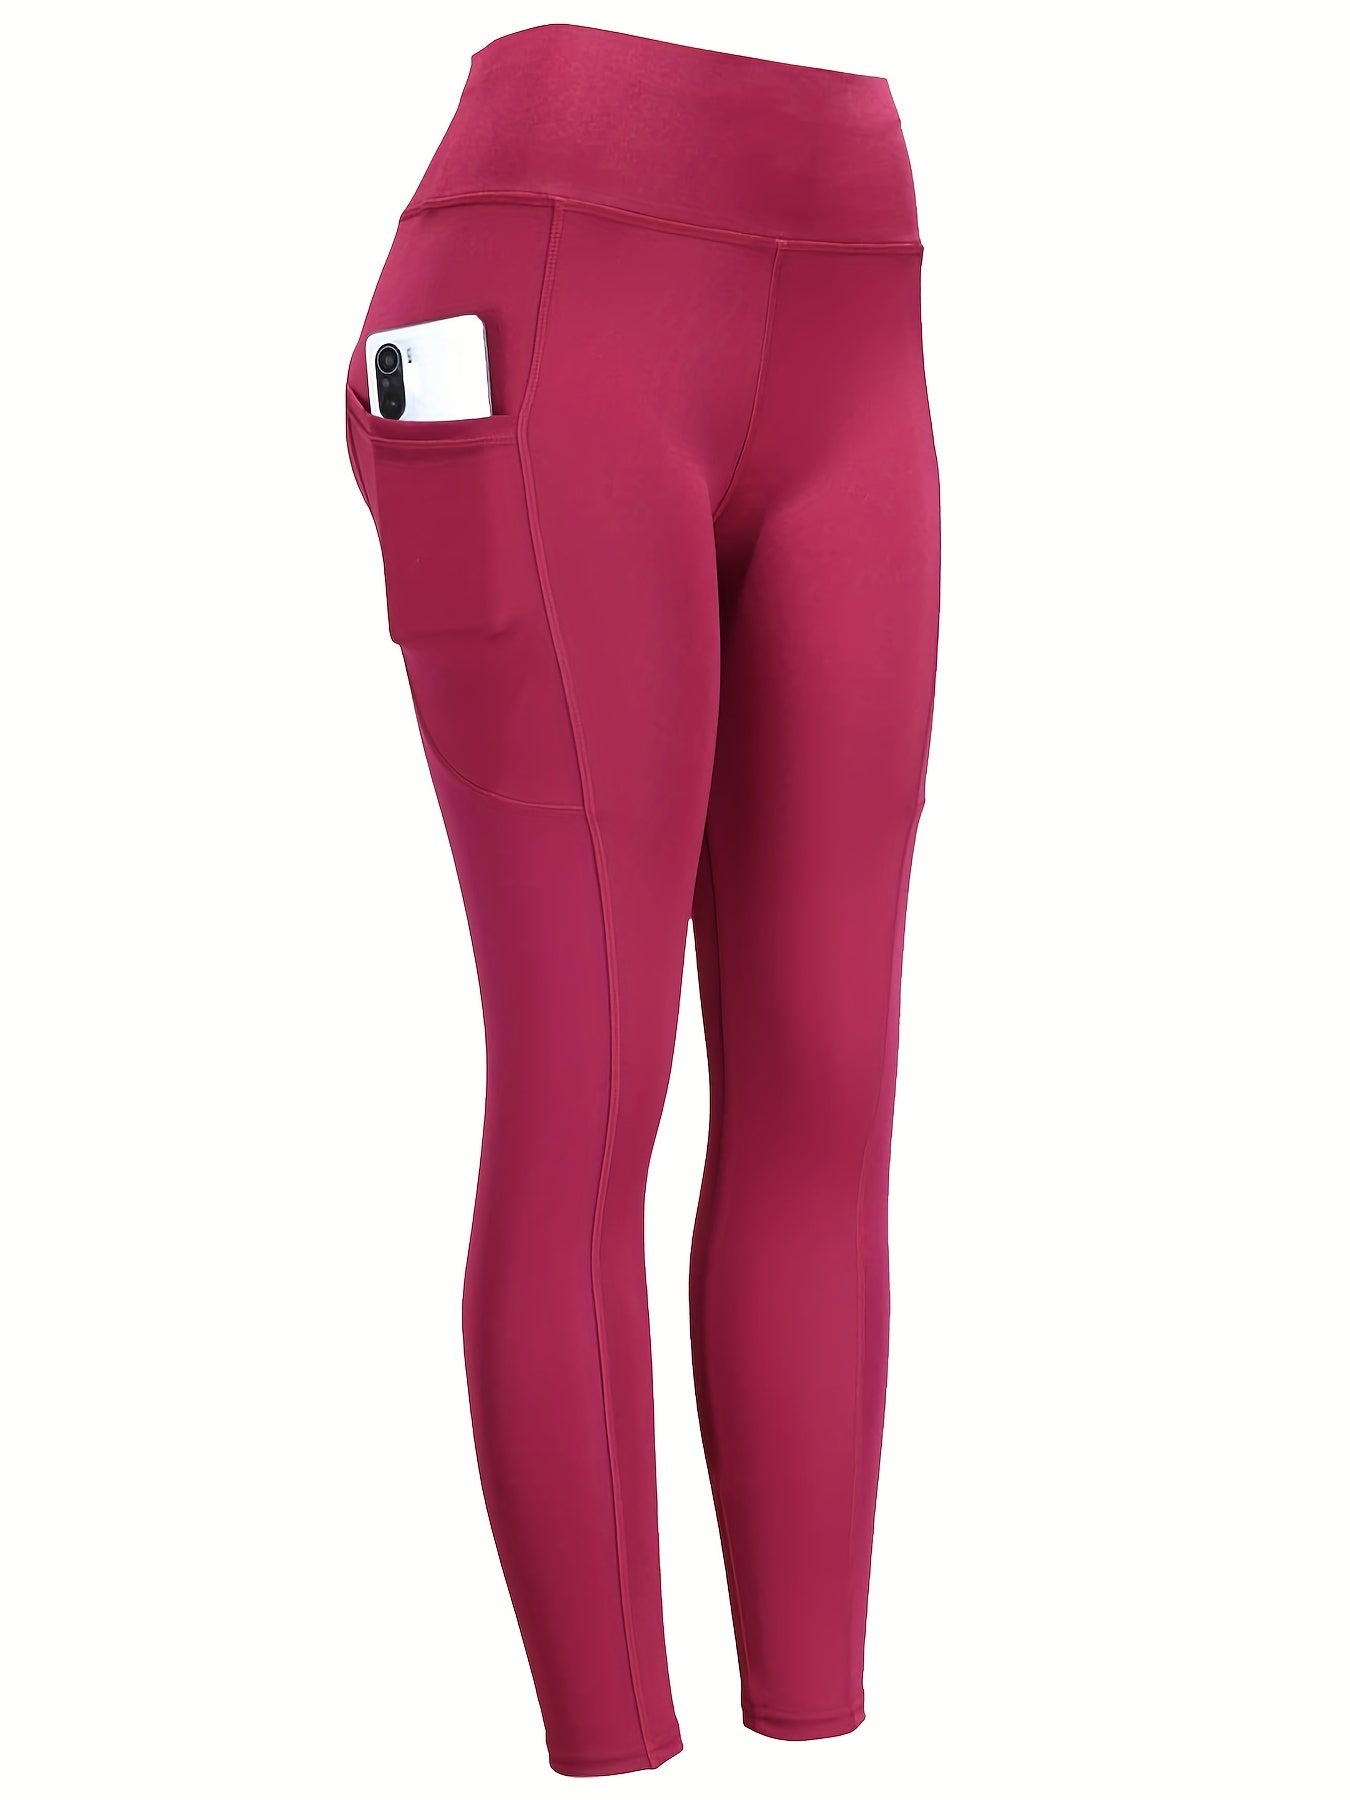 All-Season High Waist Knit Leggings with Pocket - Seamless, Butt Lifting, Stretchable Women's Sports Pants